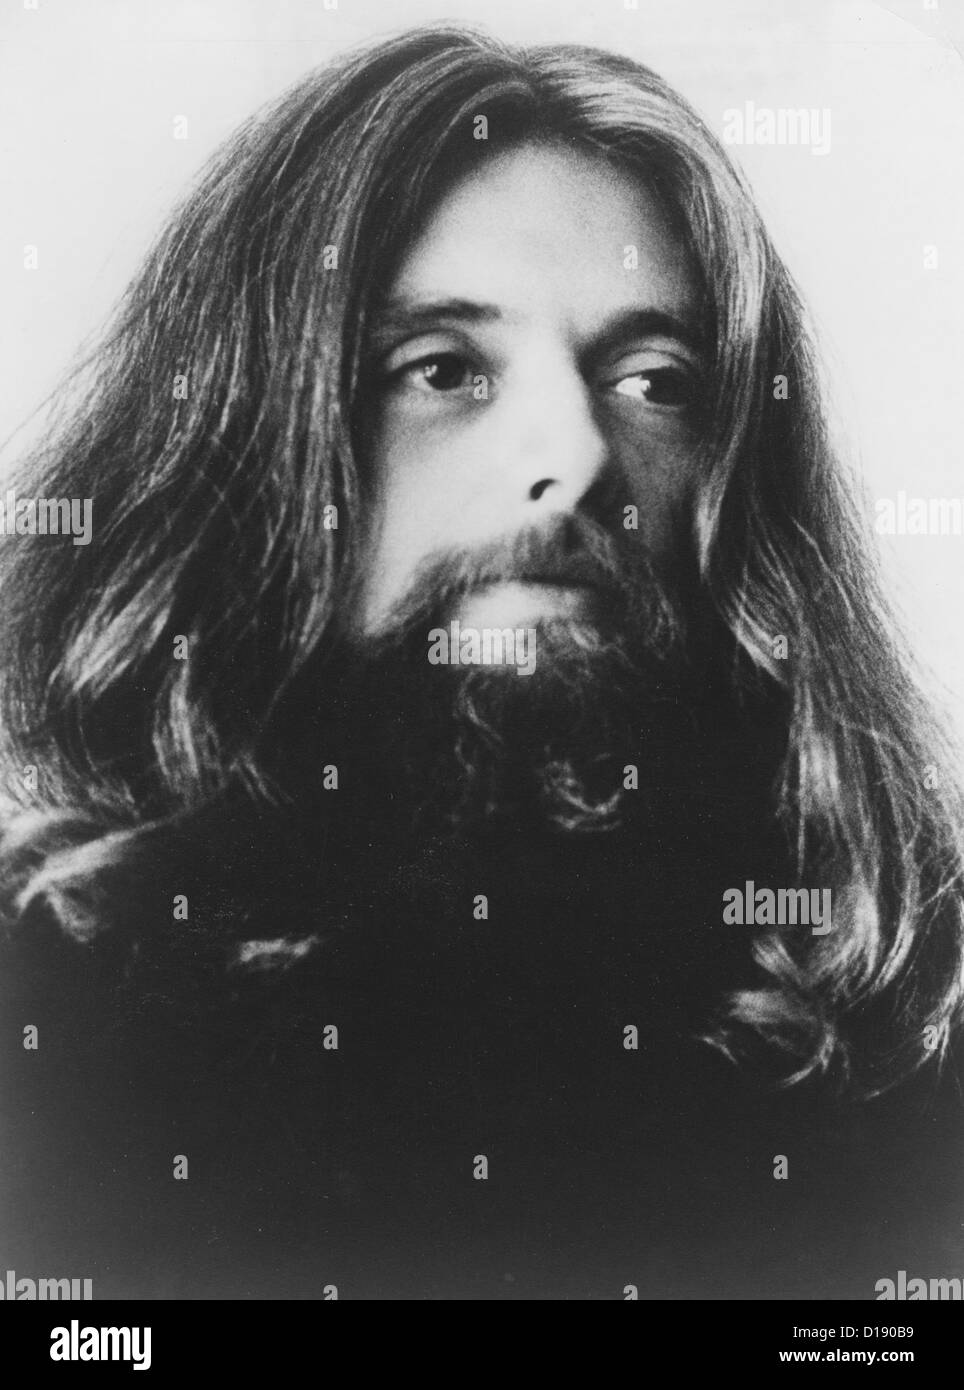 CLYDE SKIP BATTIN (1934-2003) US singer-songwriter as a member of The Byrds about 1972 Stock Photo